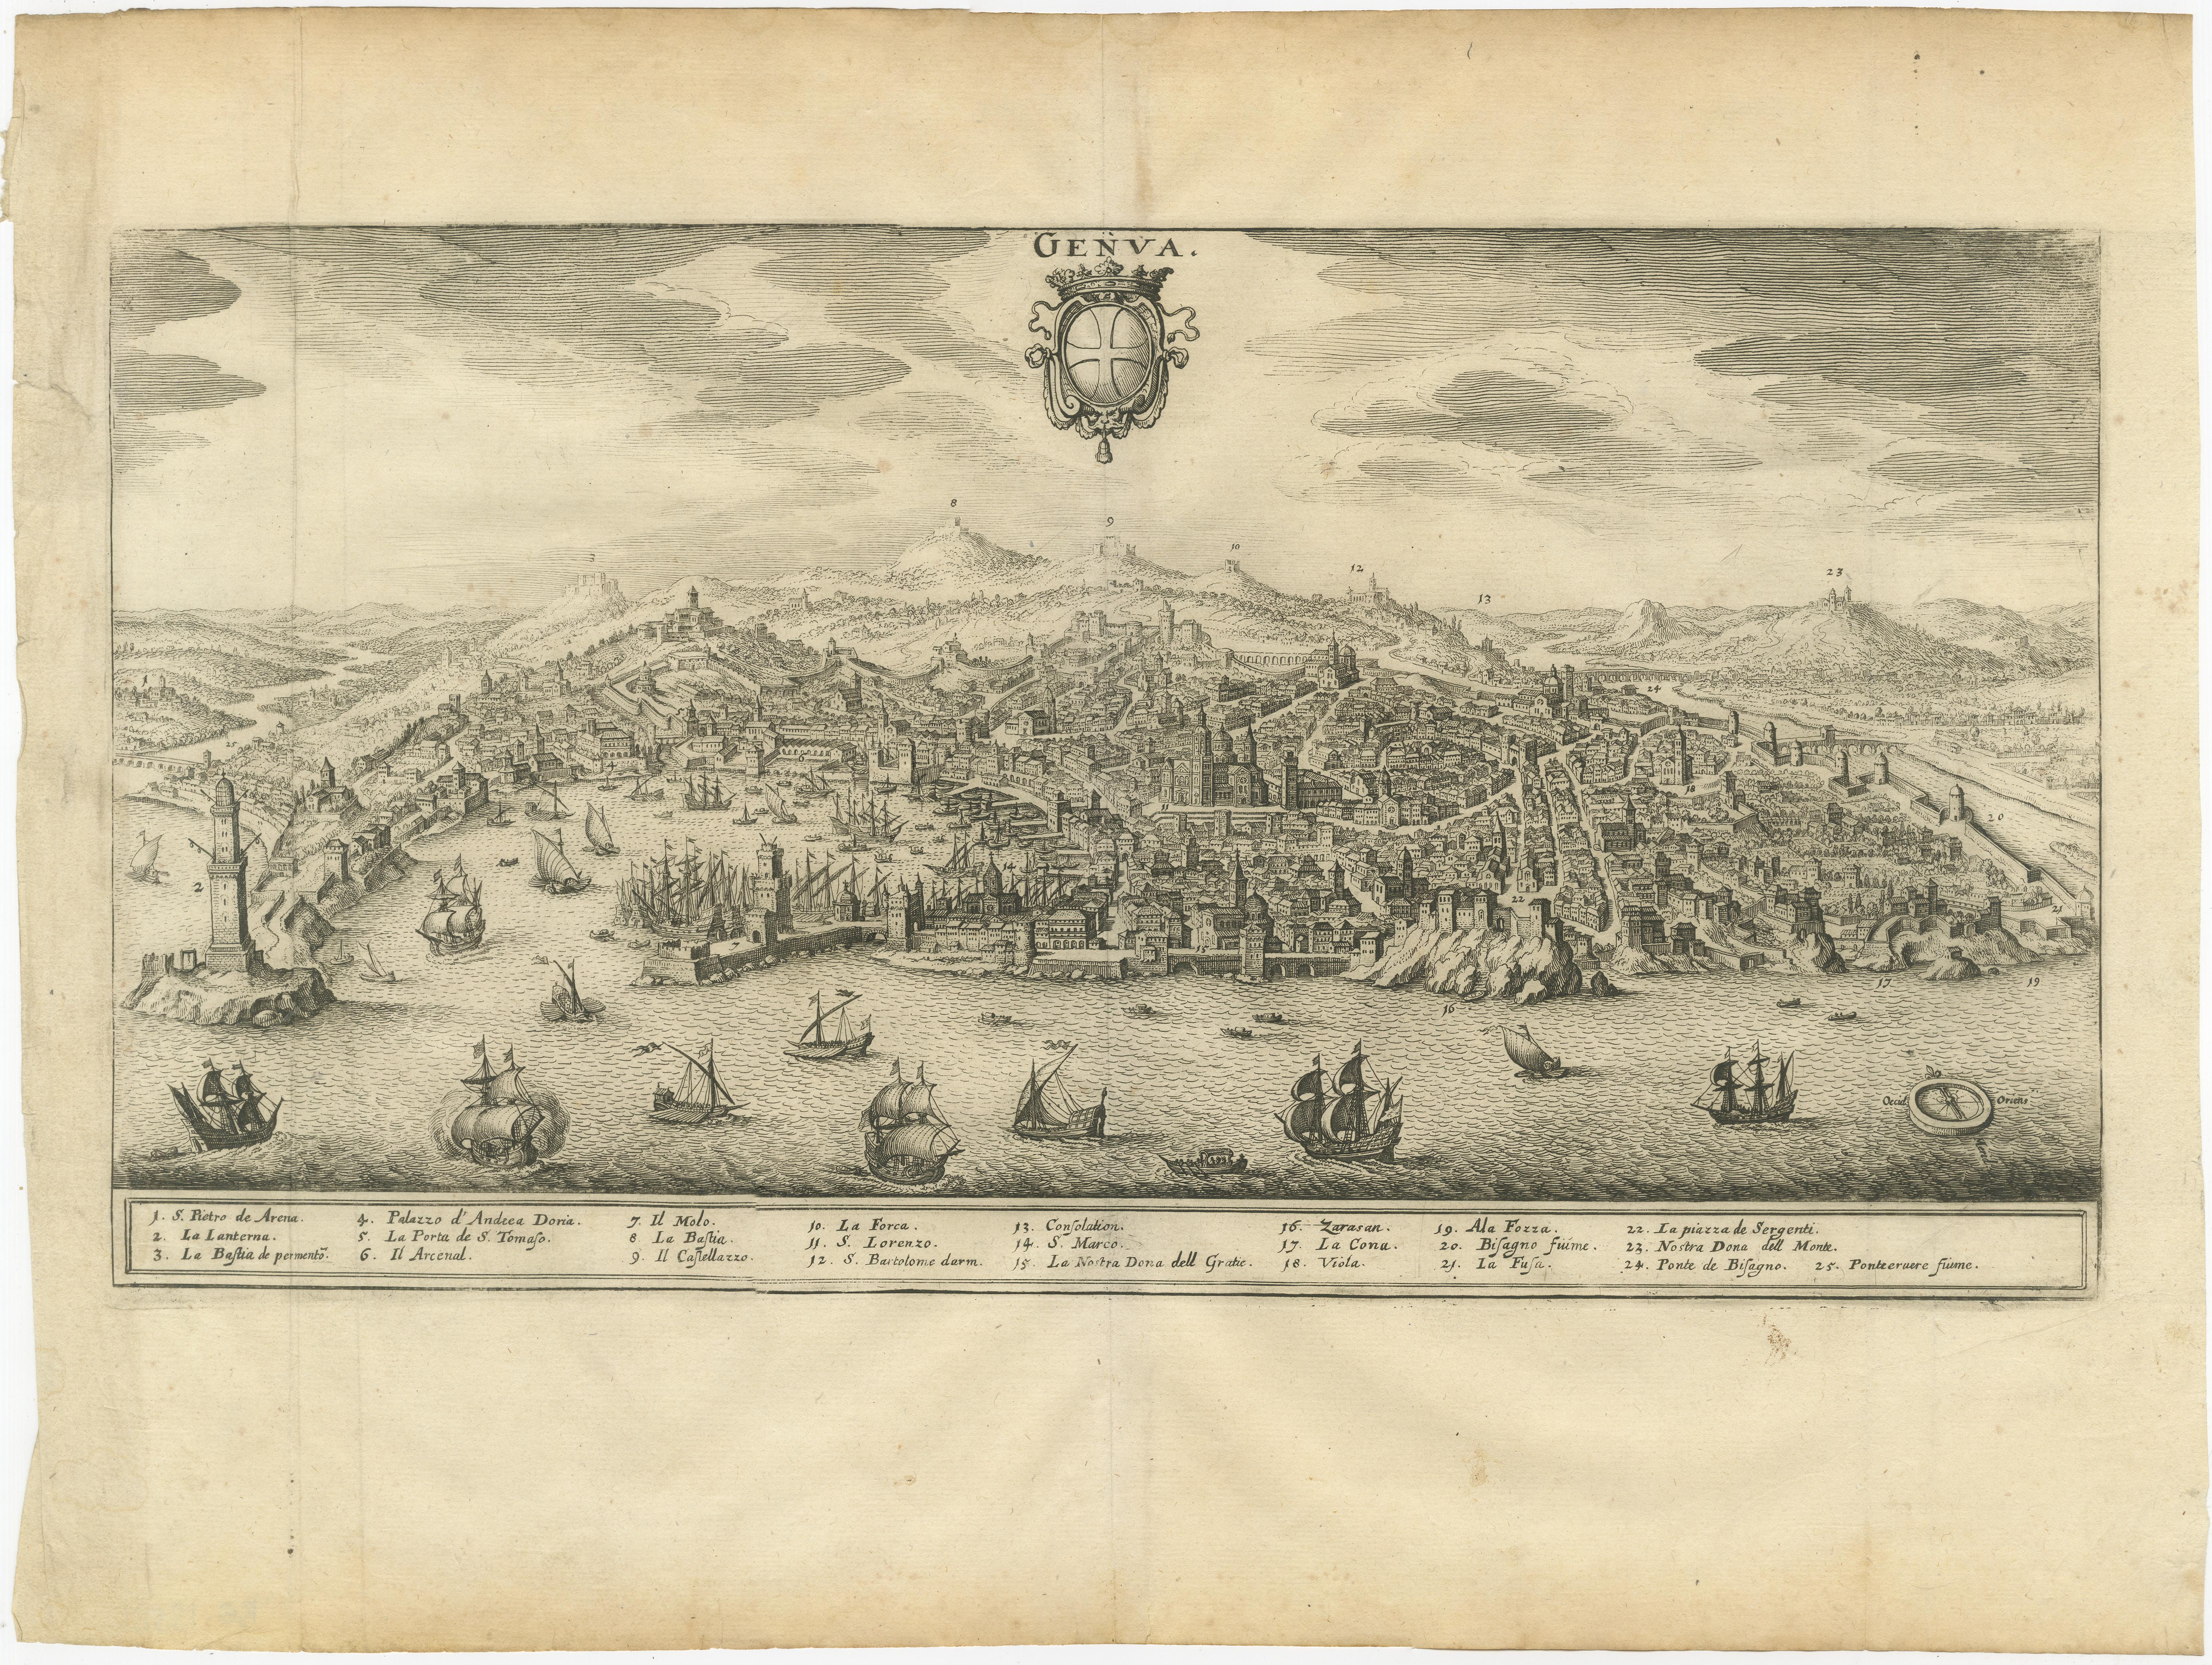 Antique print titled 'Genua'. Bird's-Eye View of the City of Genoa, Italy. Published by Matthäus Merian the Elder, circa 1650. 

Matthäus Merian sr. (the Elder; 1593-1630) was born in Switzerland but eventually settled in Frankfurt; he was trained